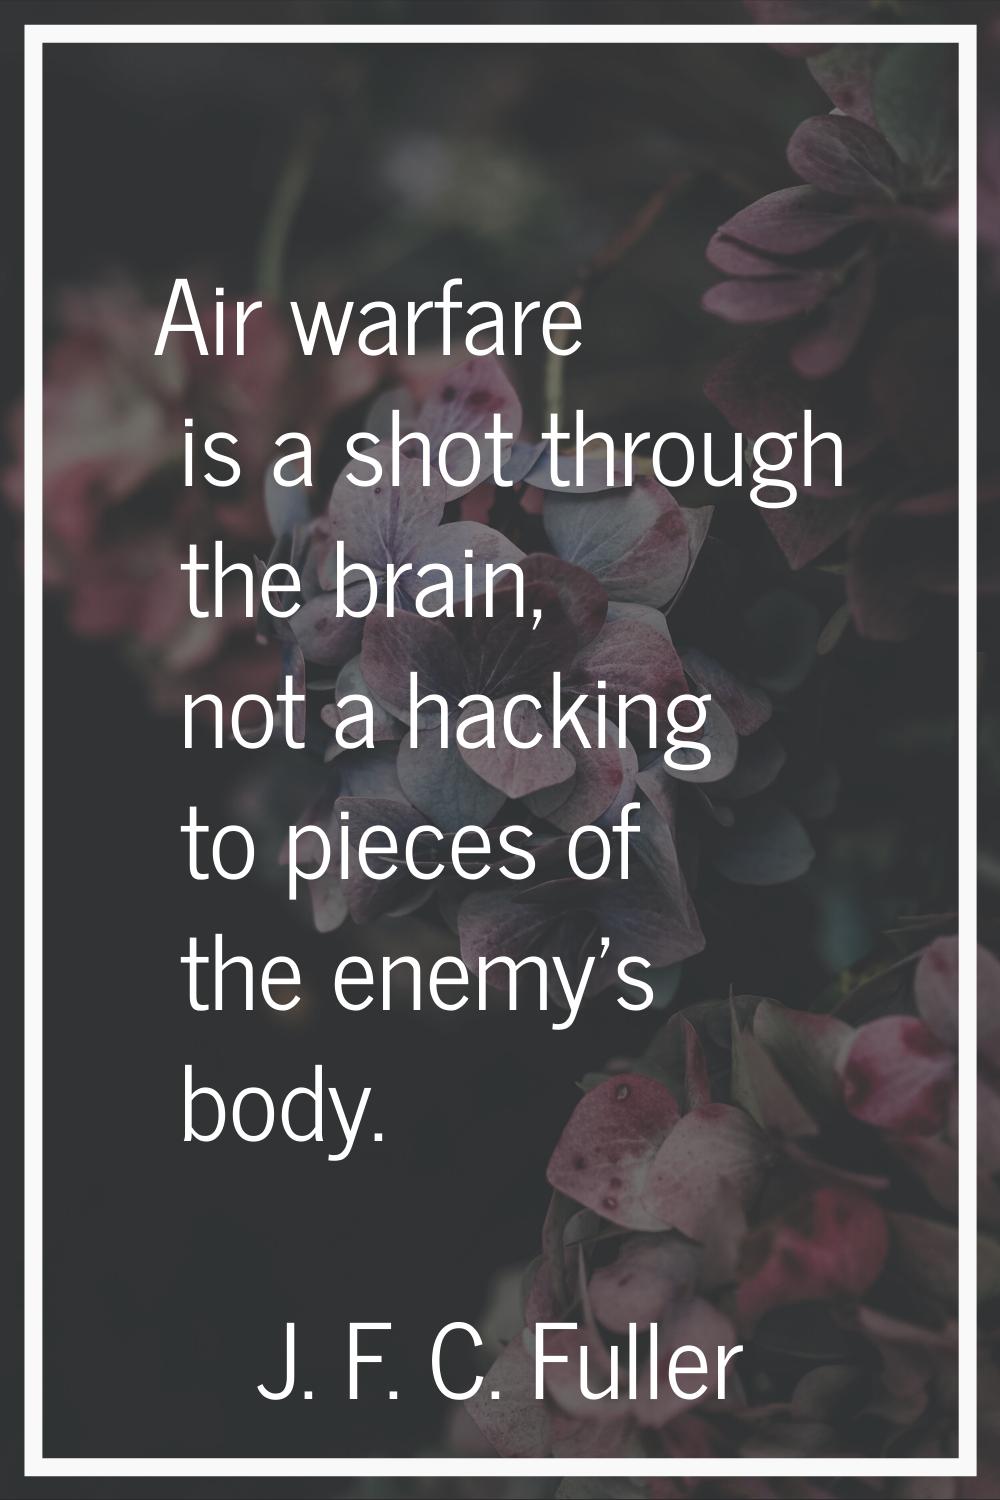 Air warfare is a shot through the brain, not a hacking to pieces of the enemy's body.